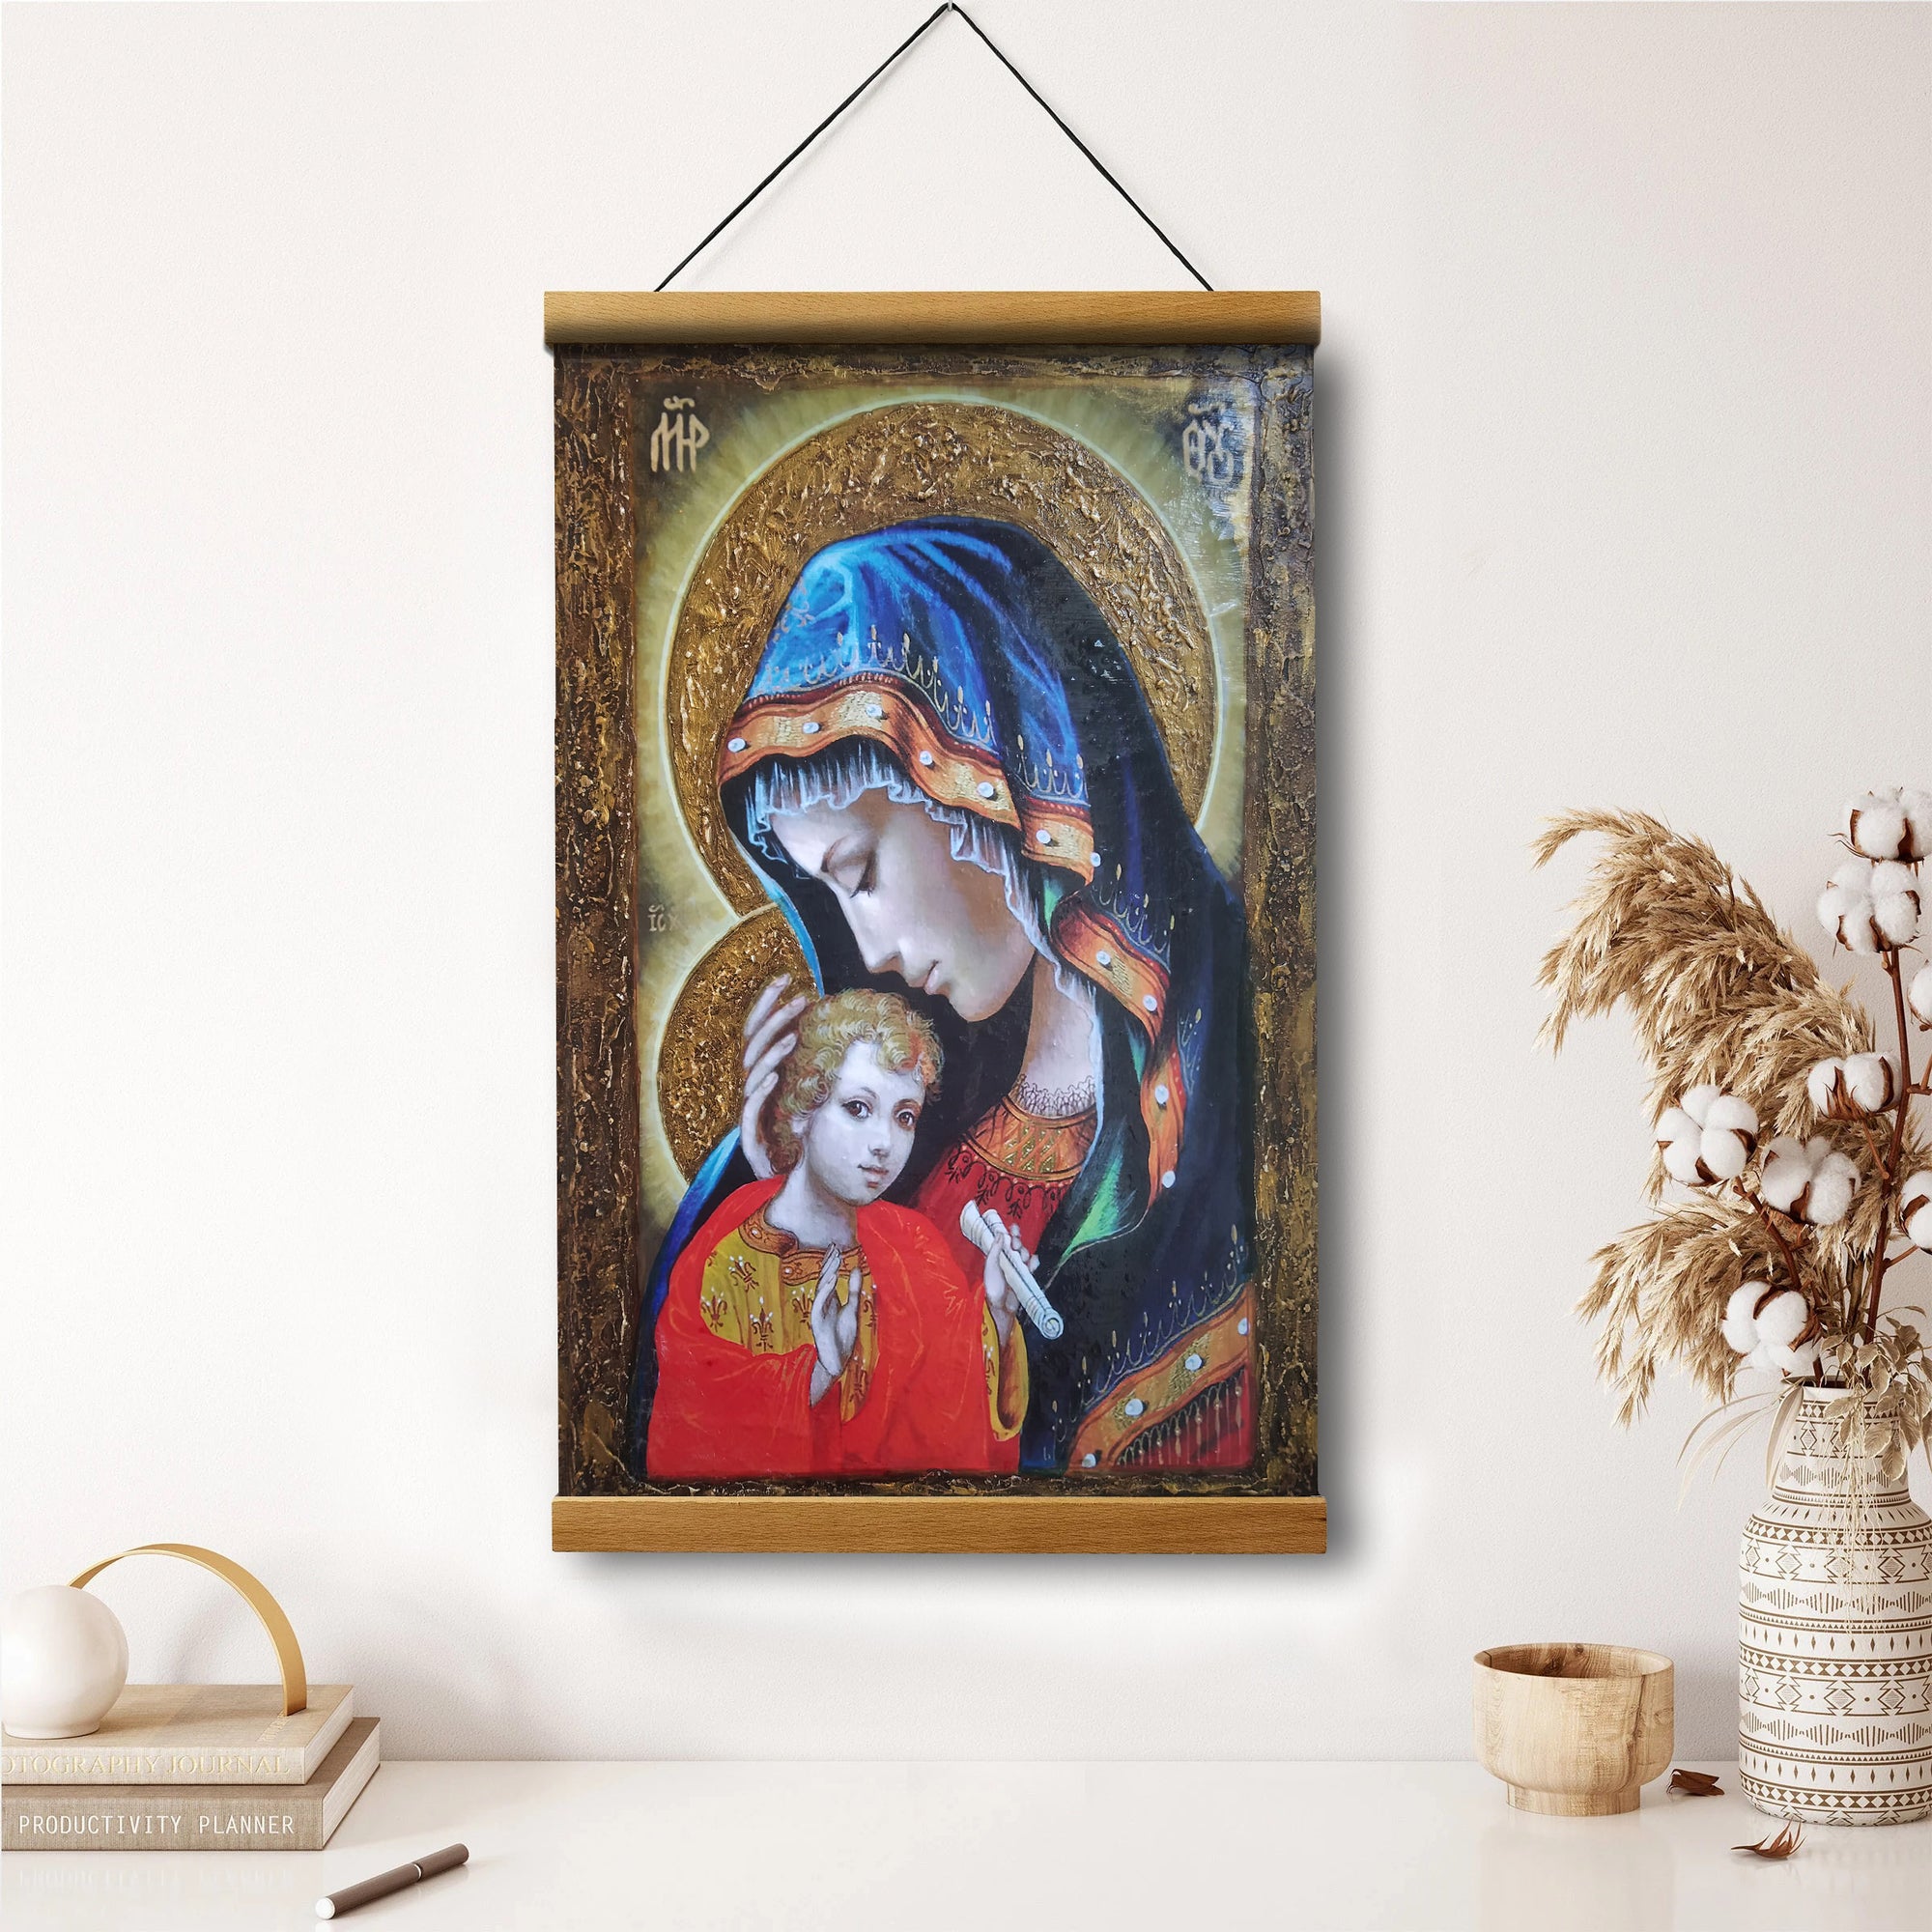 Virgin Mary Madonna Religious Hanging Canvas Wall Art - Baptism Gift - Catholic Hanging Canvas Wall Art - Religious Gift - Christian Wall Art Decor